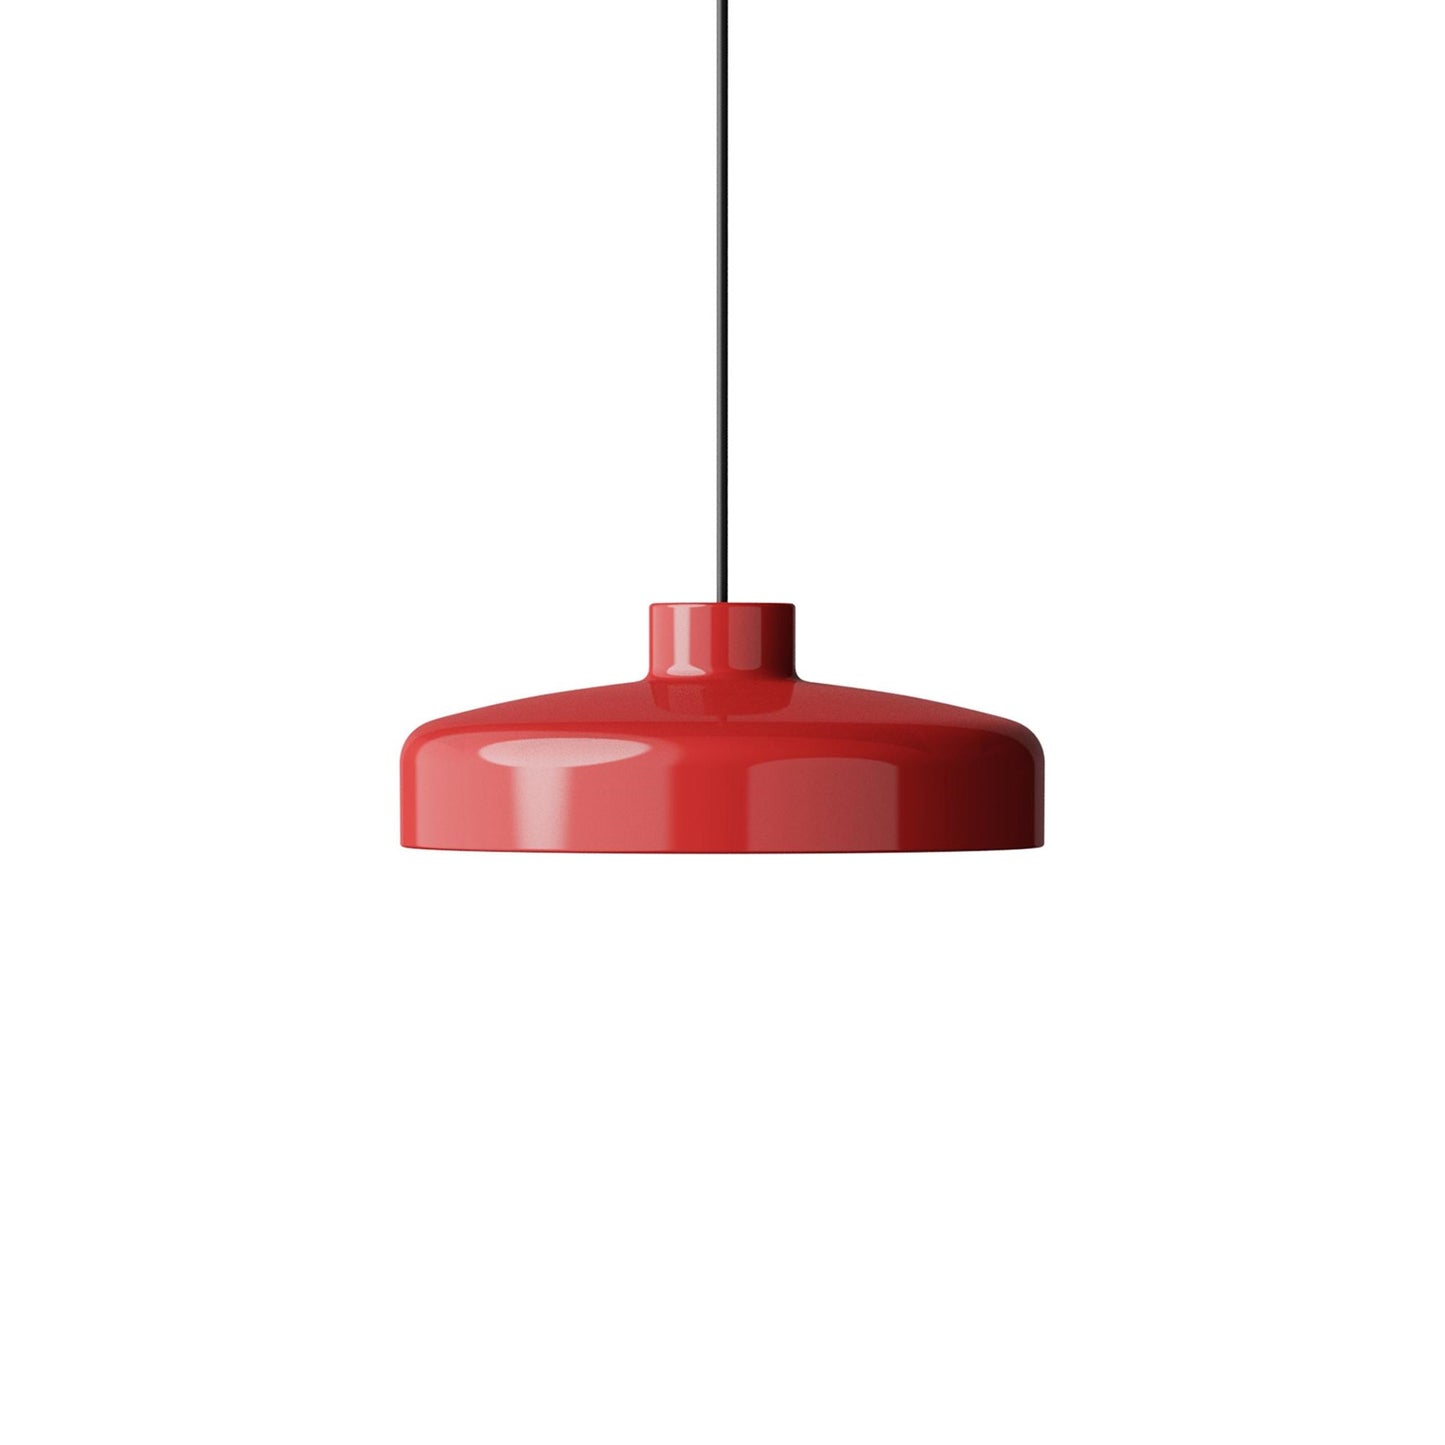 Lacquer Pendant Lamp Medium by NINE #Red